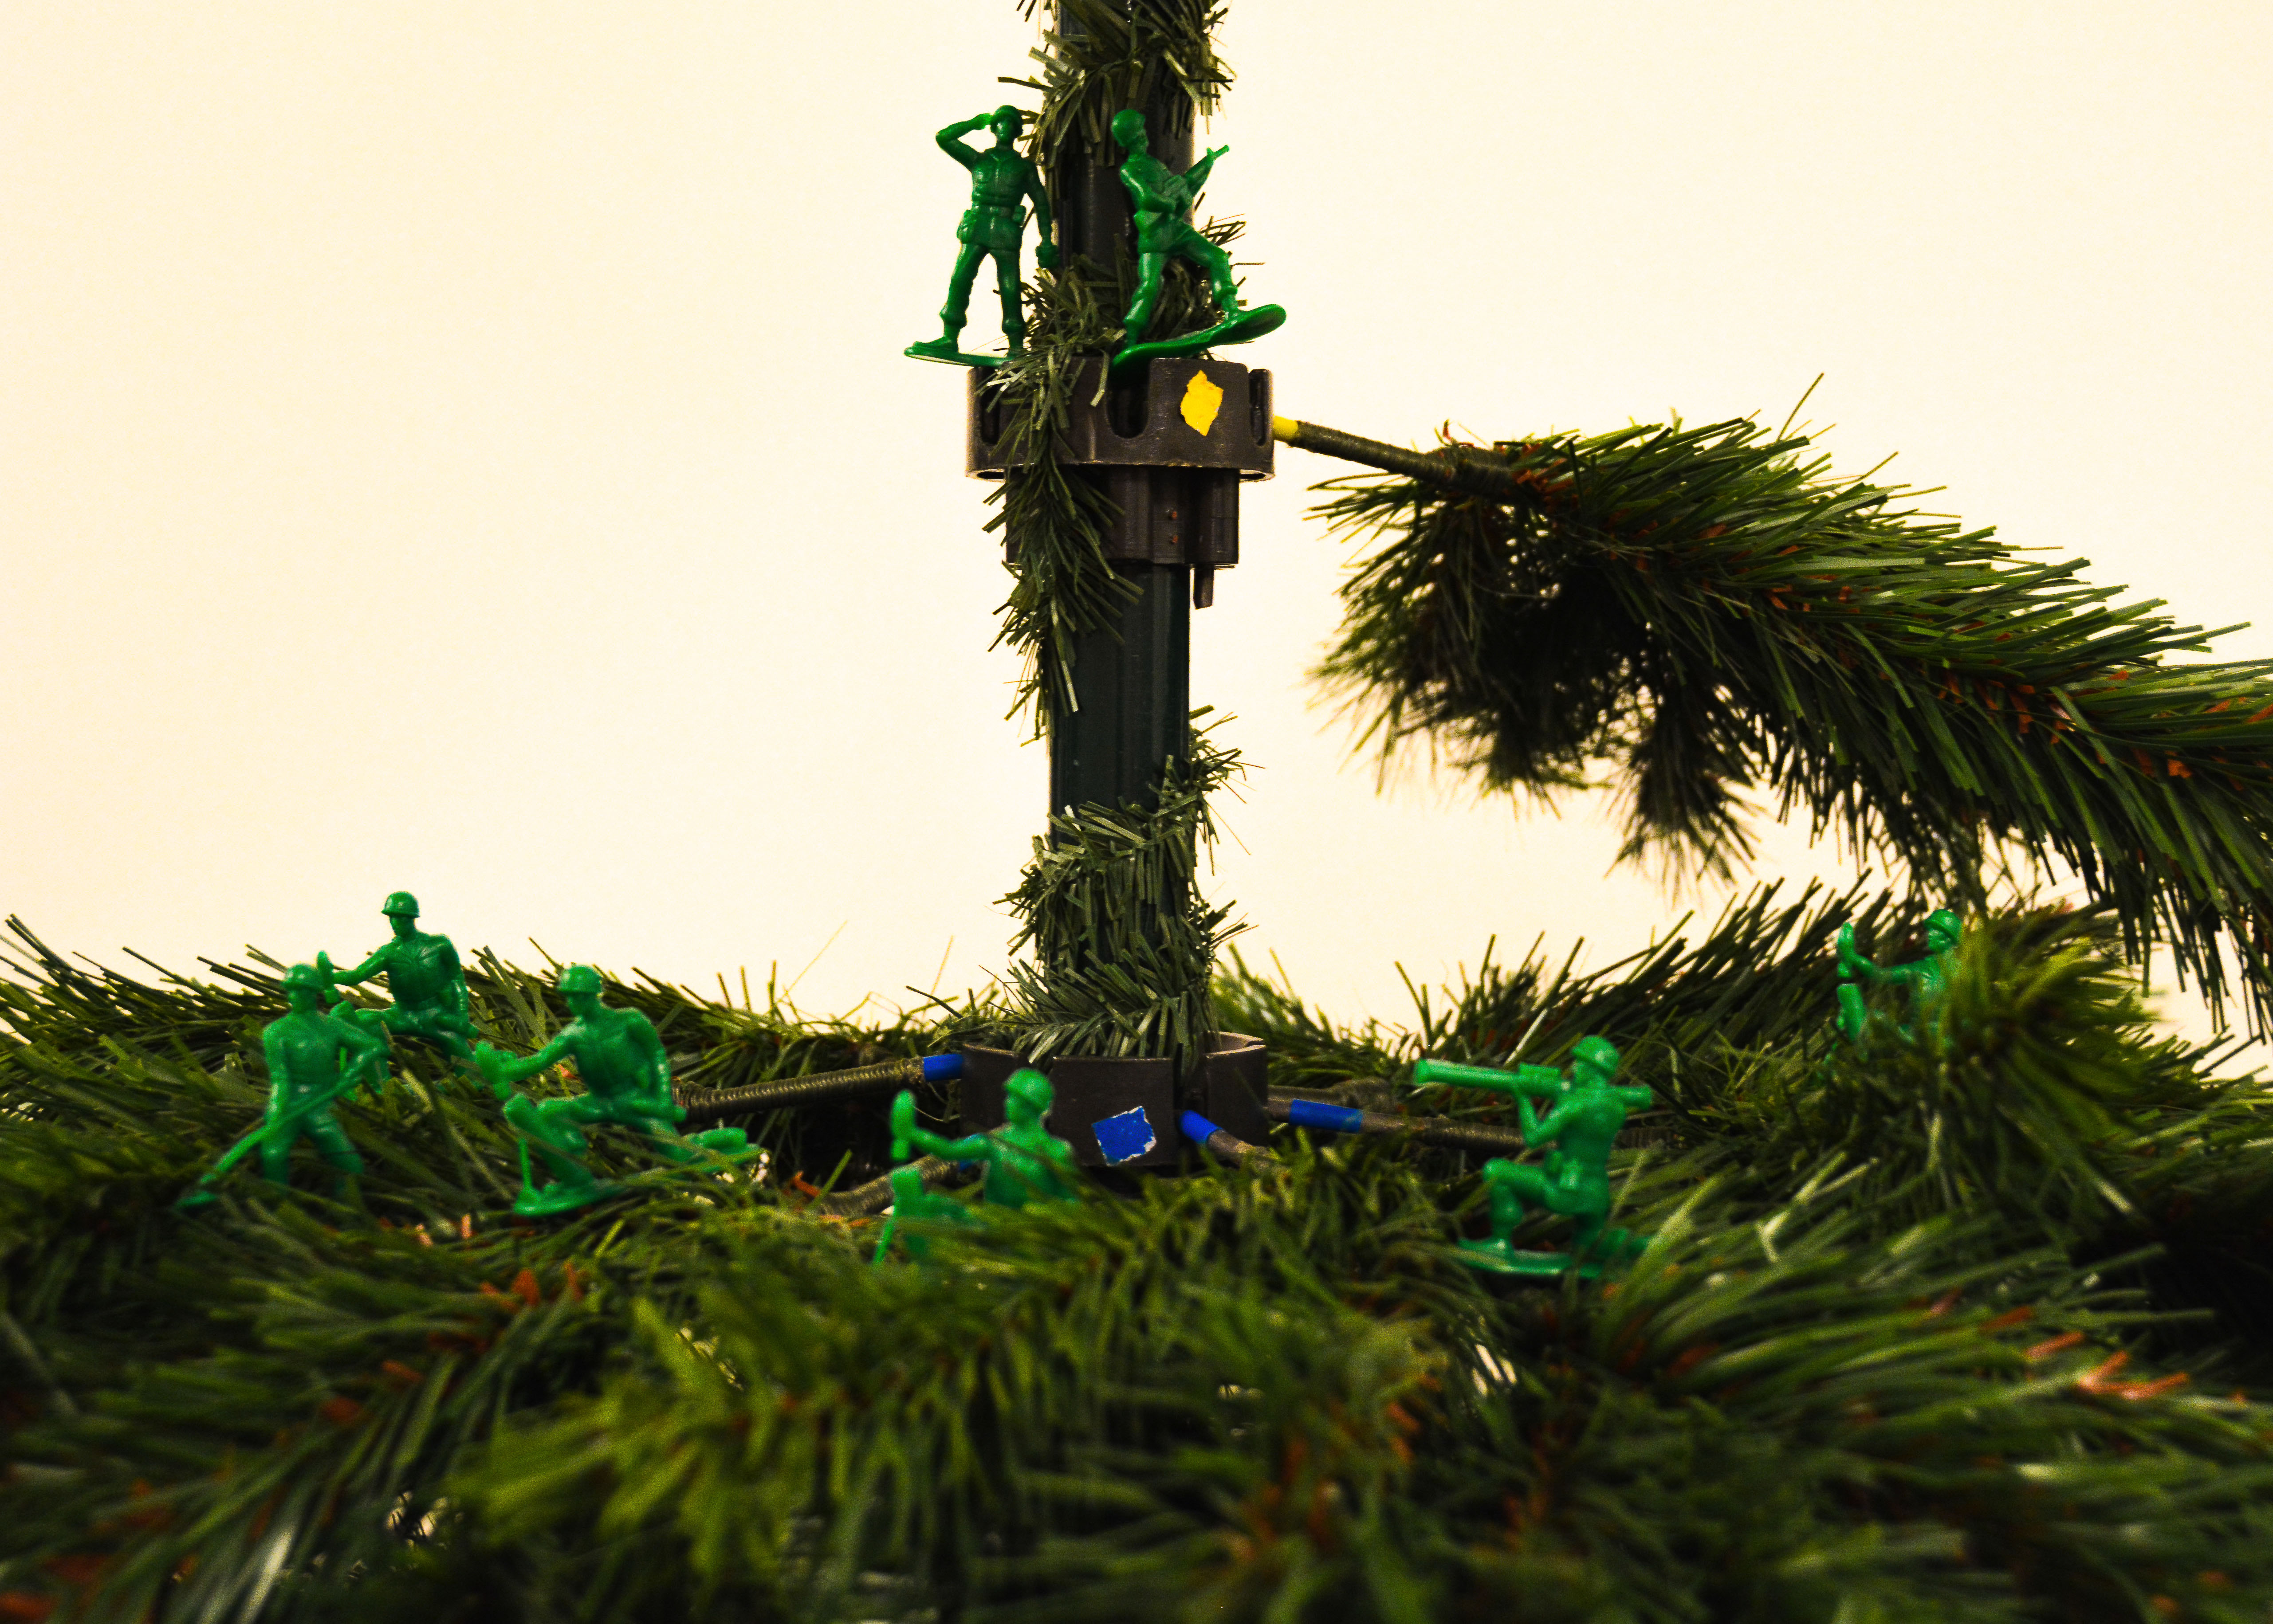 Toy Story Characters Put Up A Christmas Tree